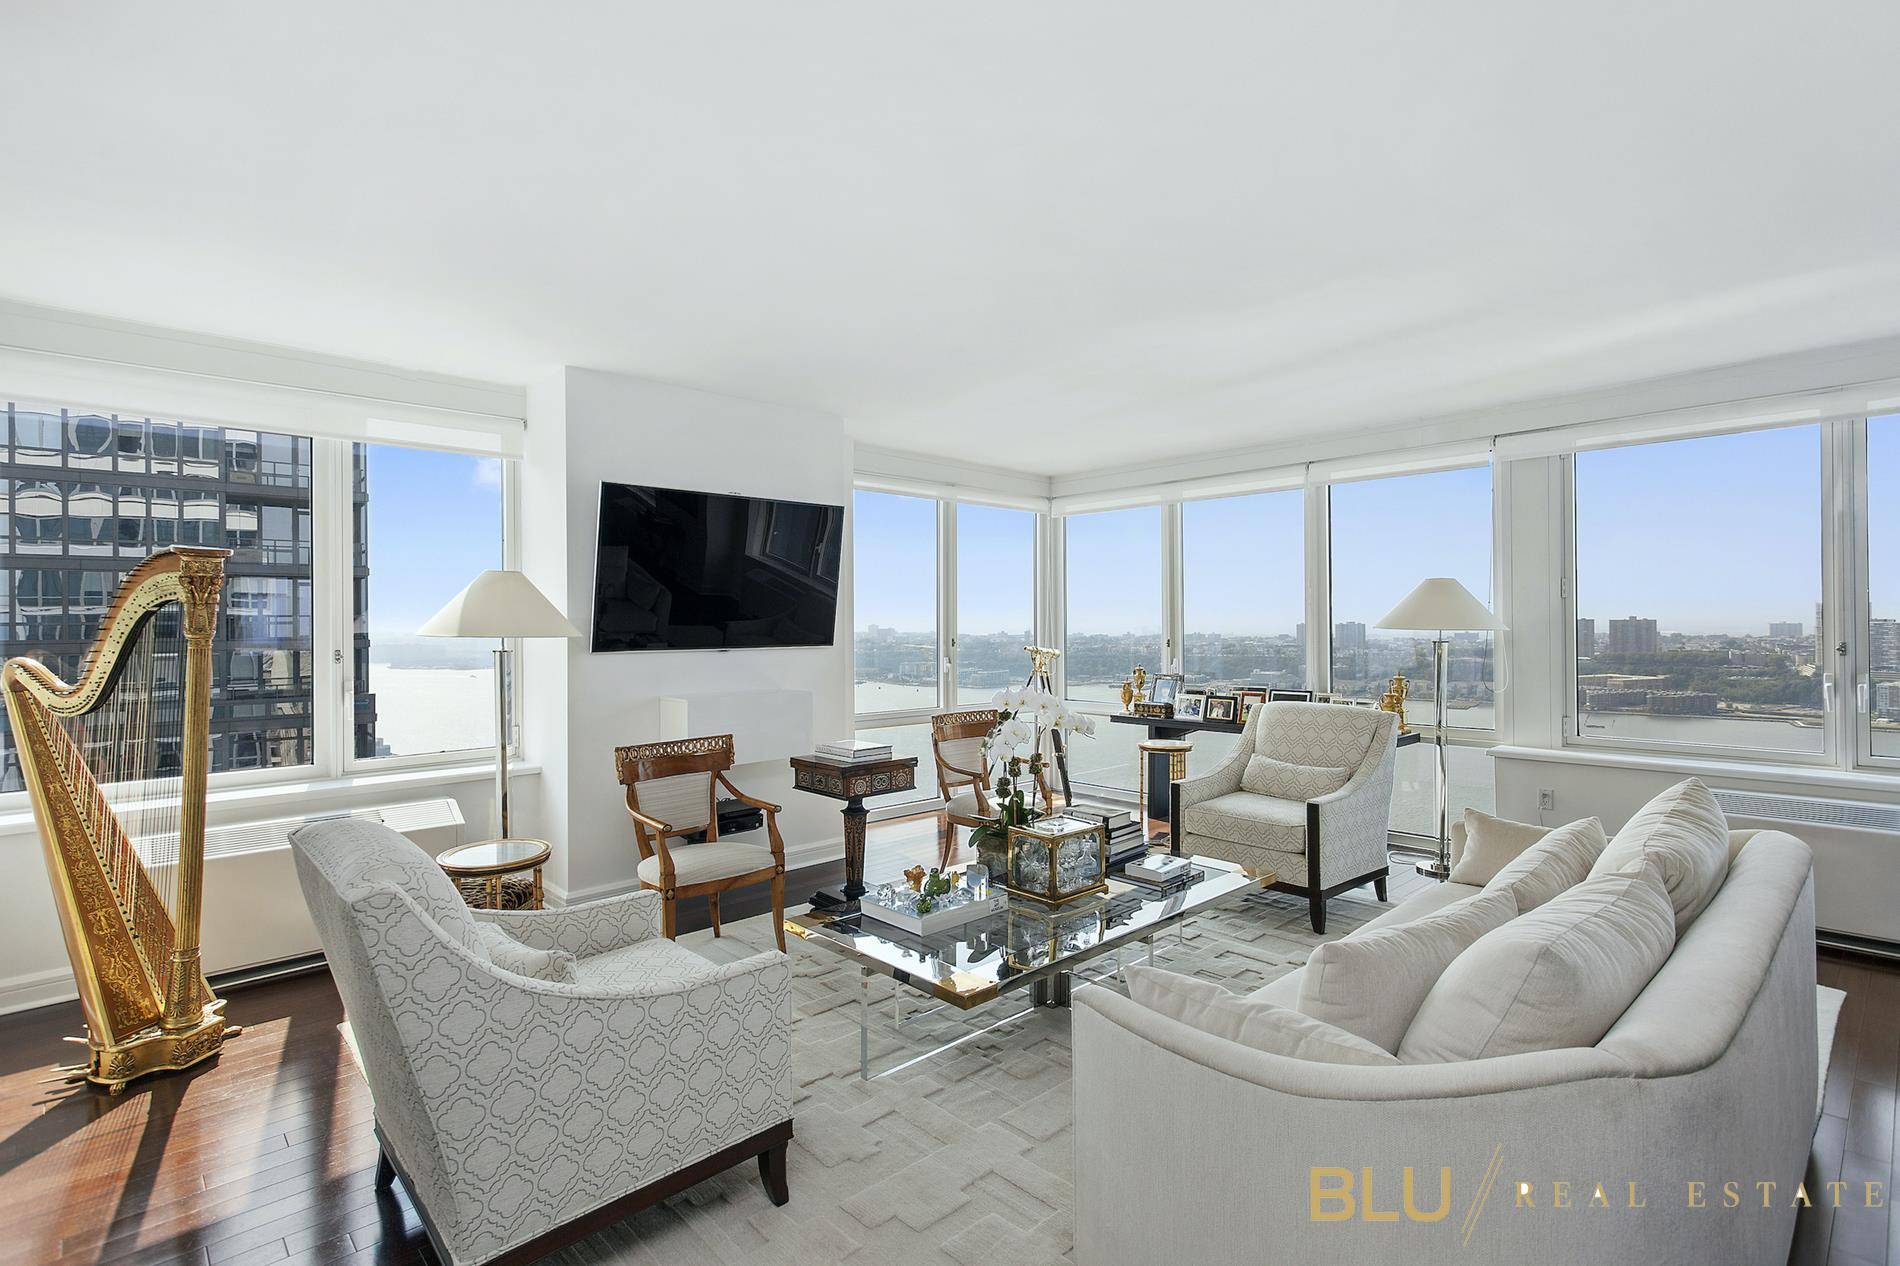 DescriptionWelcome to The Rushmore, One of Riverside boulevards most luxurious homes for New York's finest.